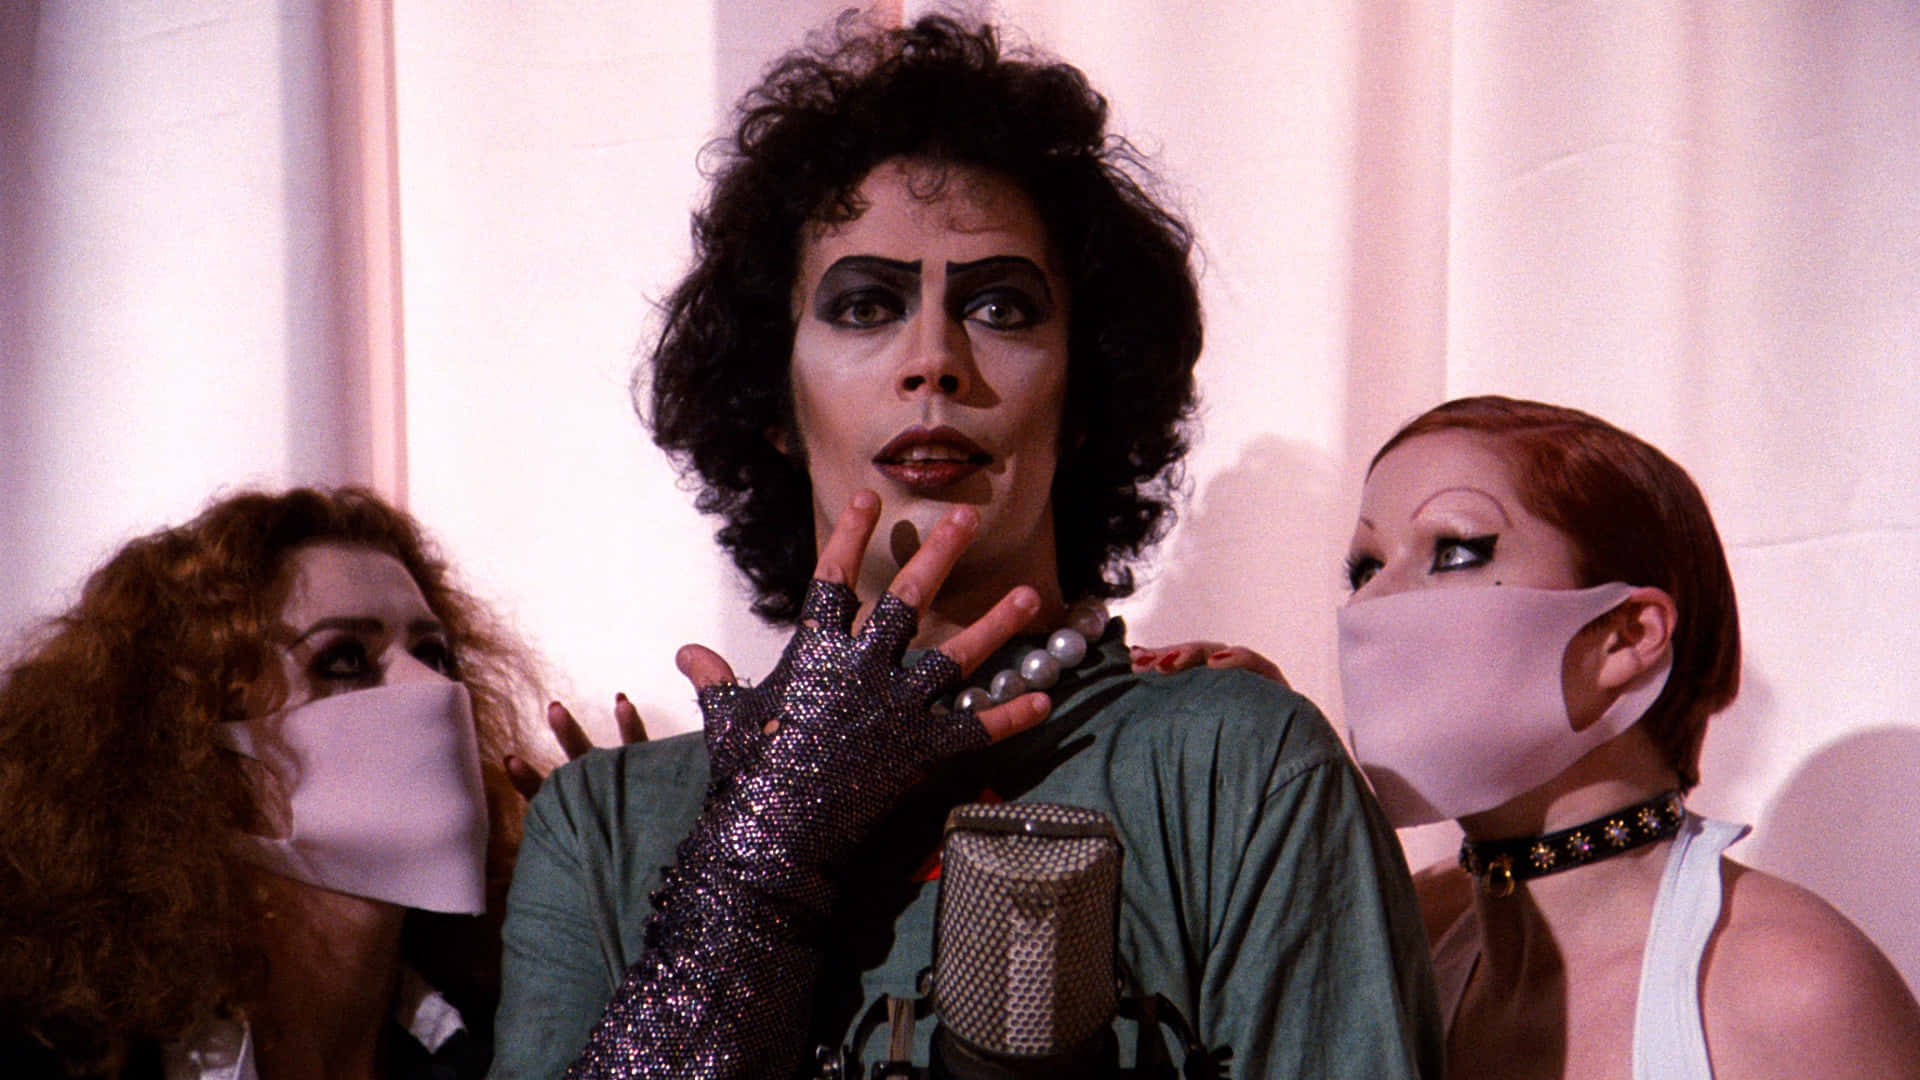 Tim Curry in a Legendary Performance Wallpaper